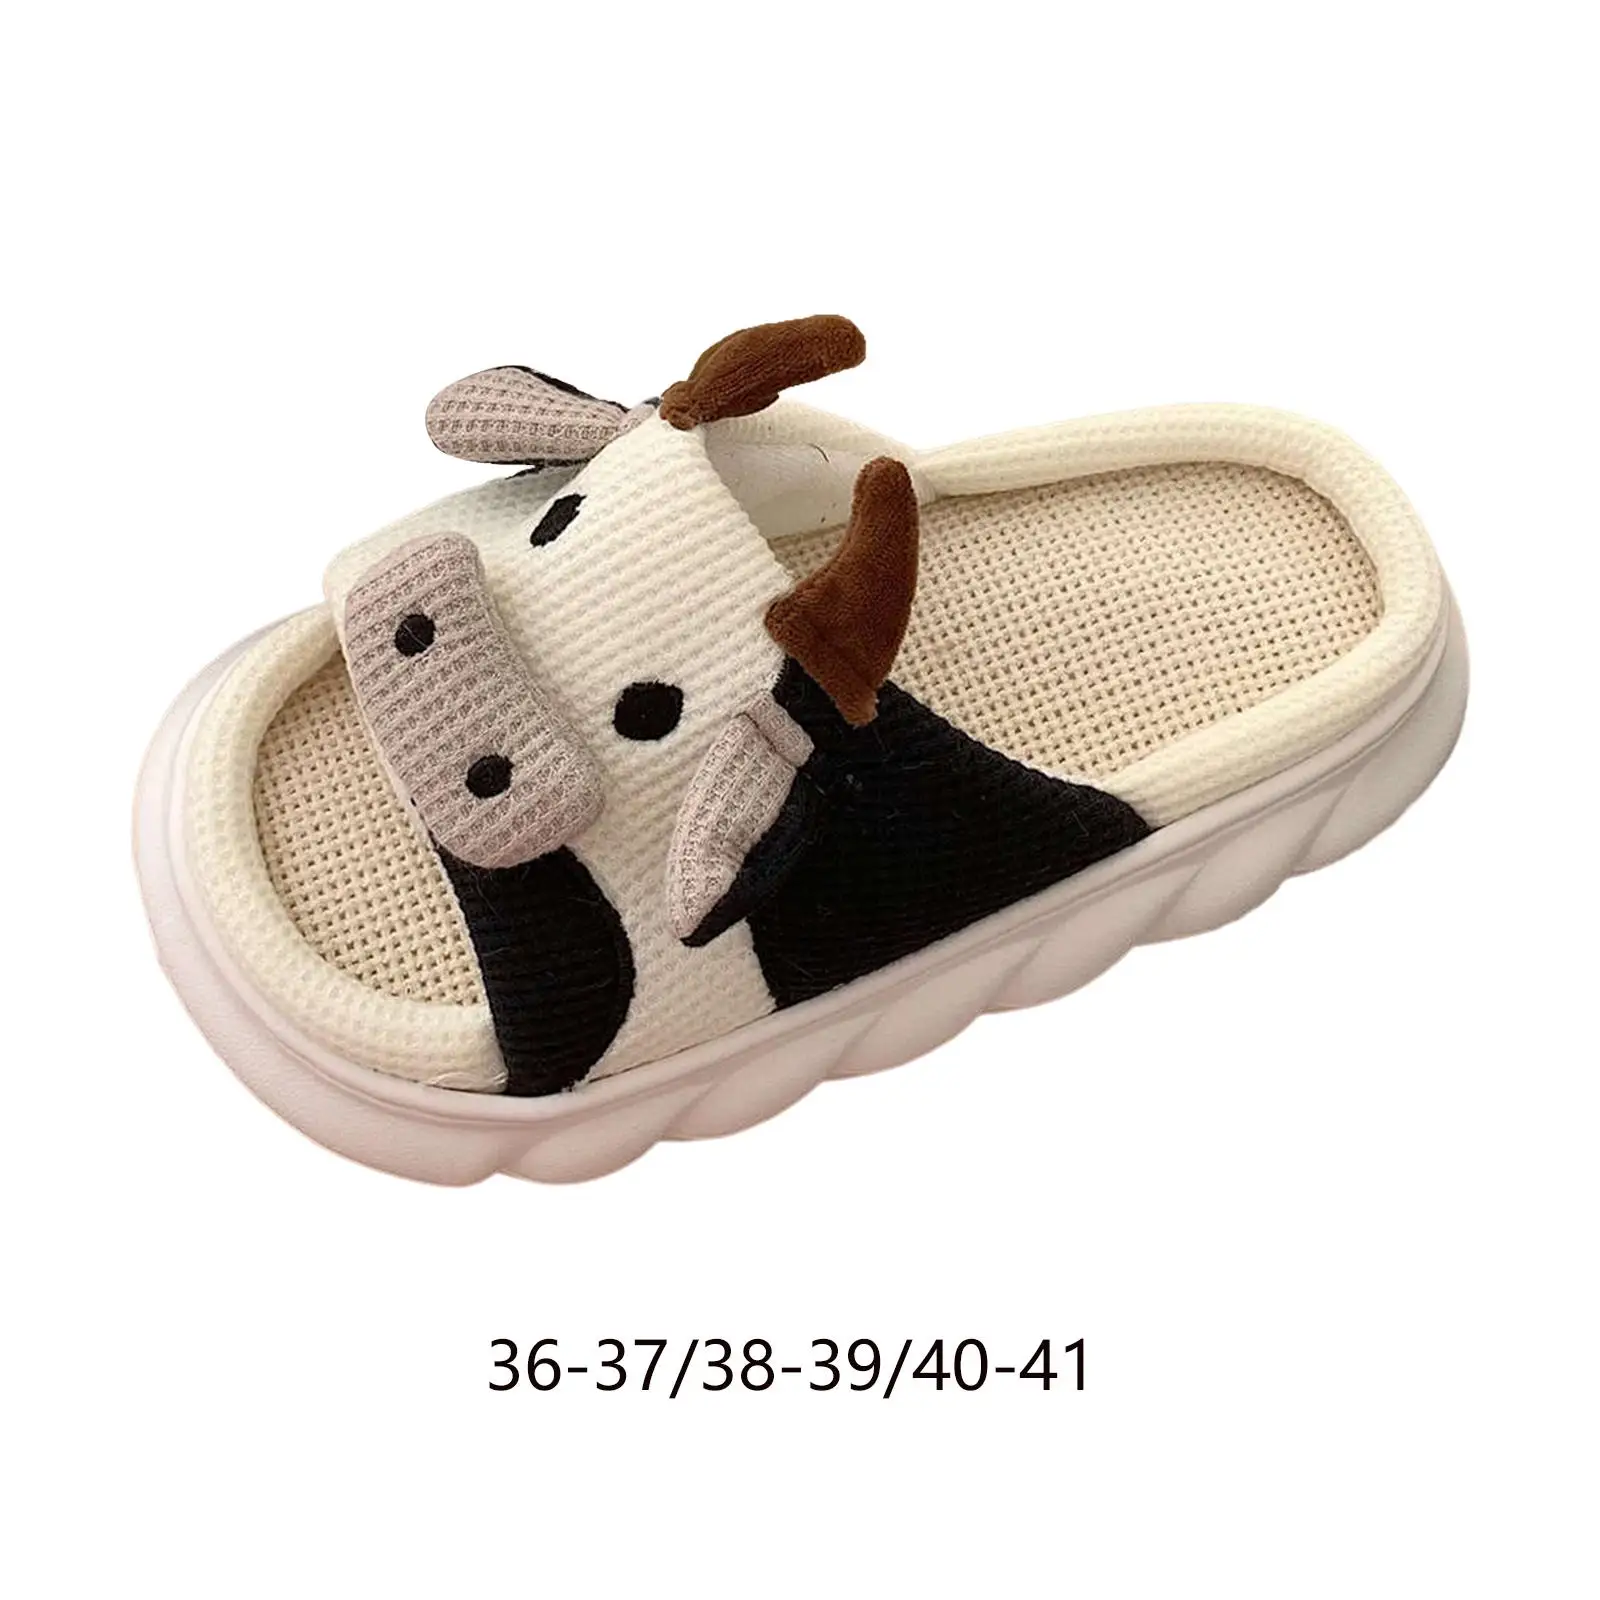 Cow Linen Cotton Slippers Soft Washable Flax Home Slippers for Indoor Outdoor Women Girls